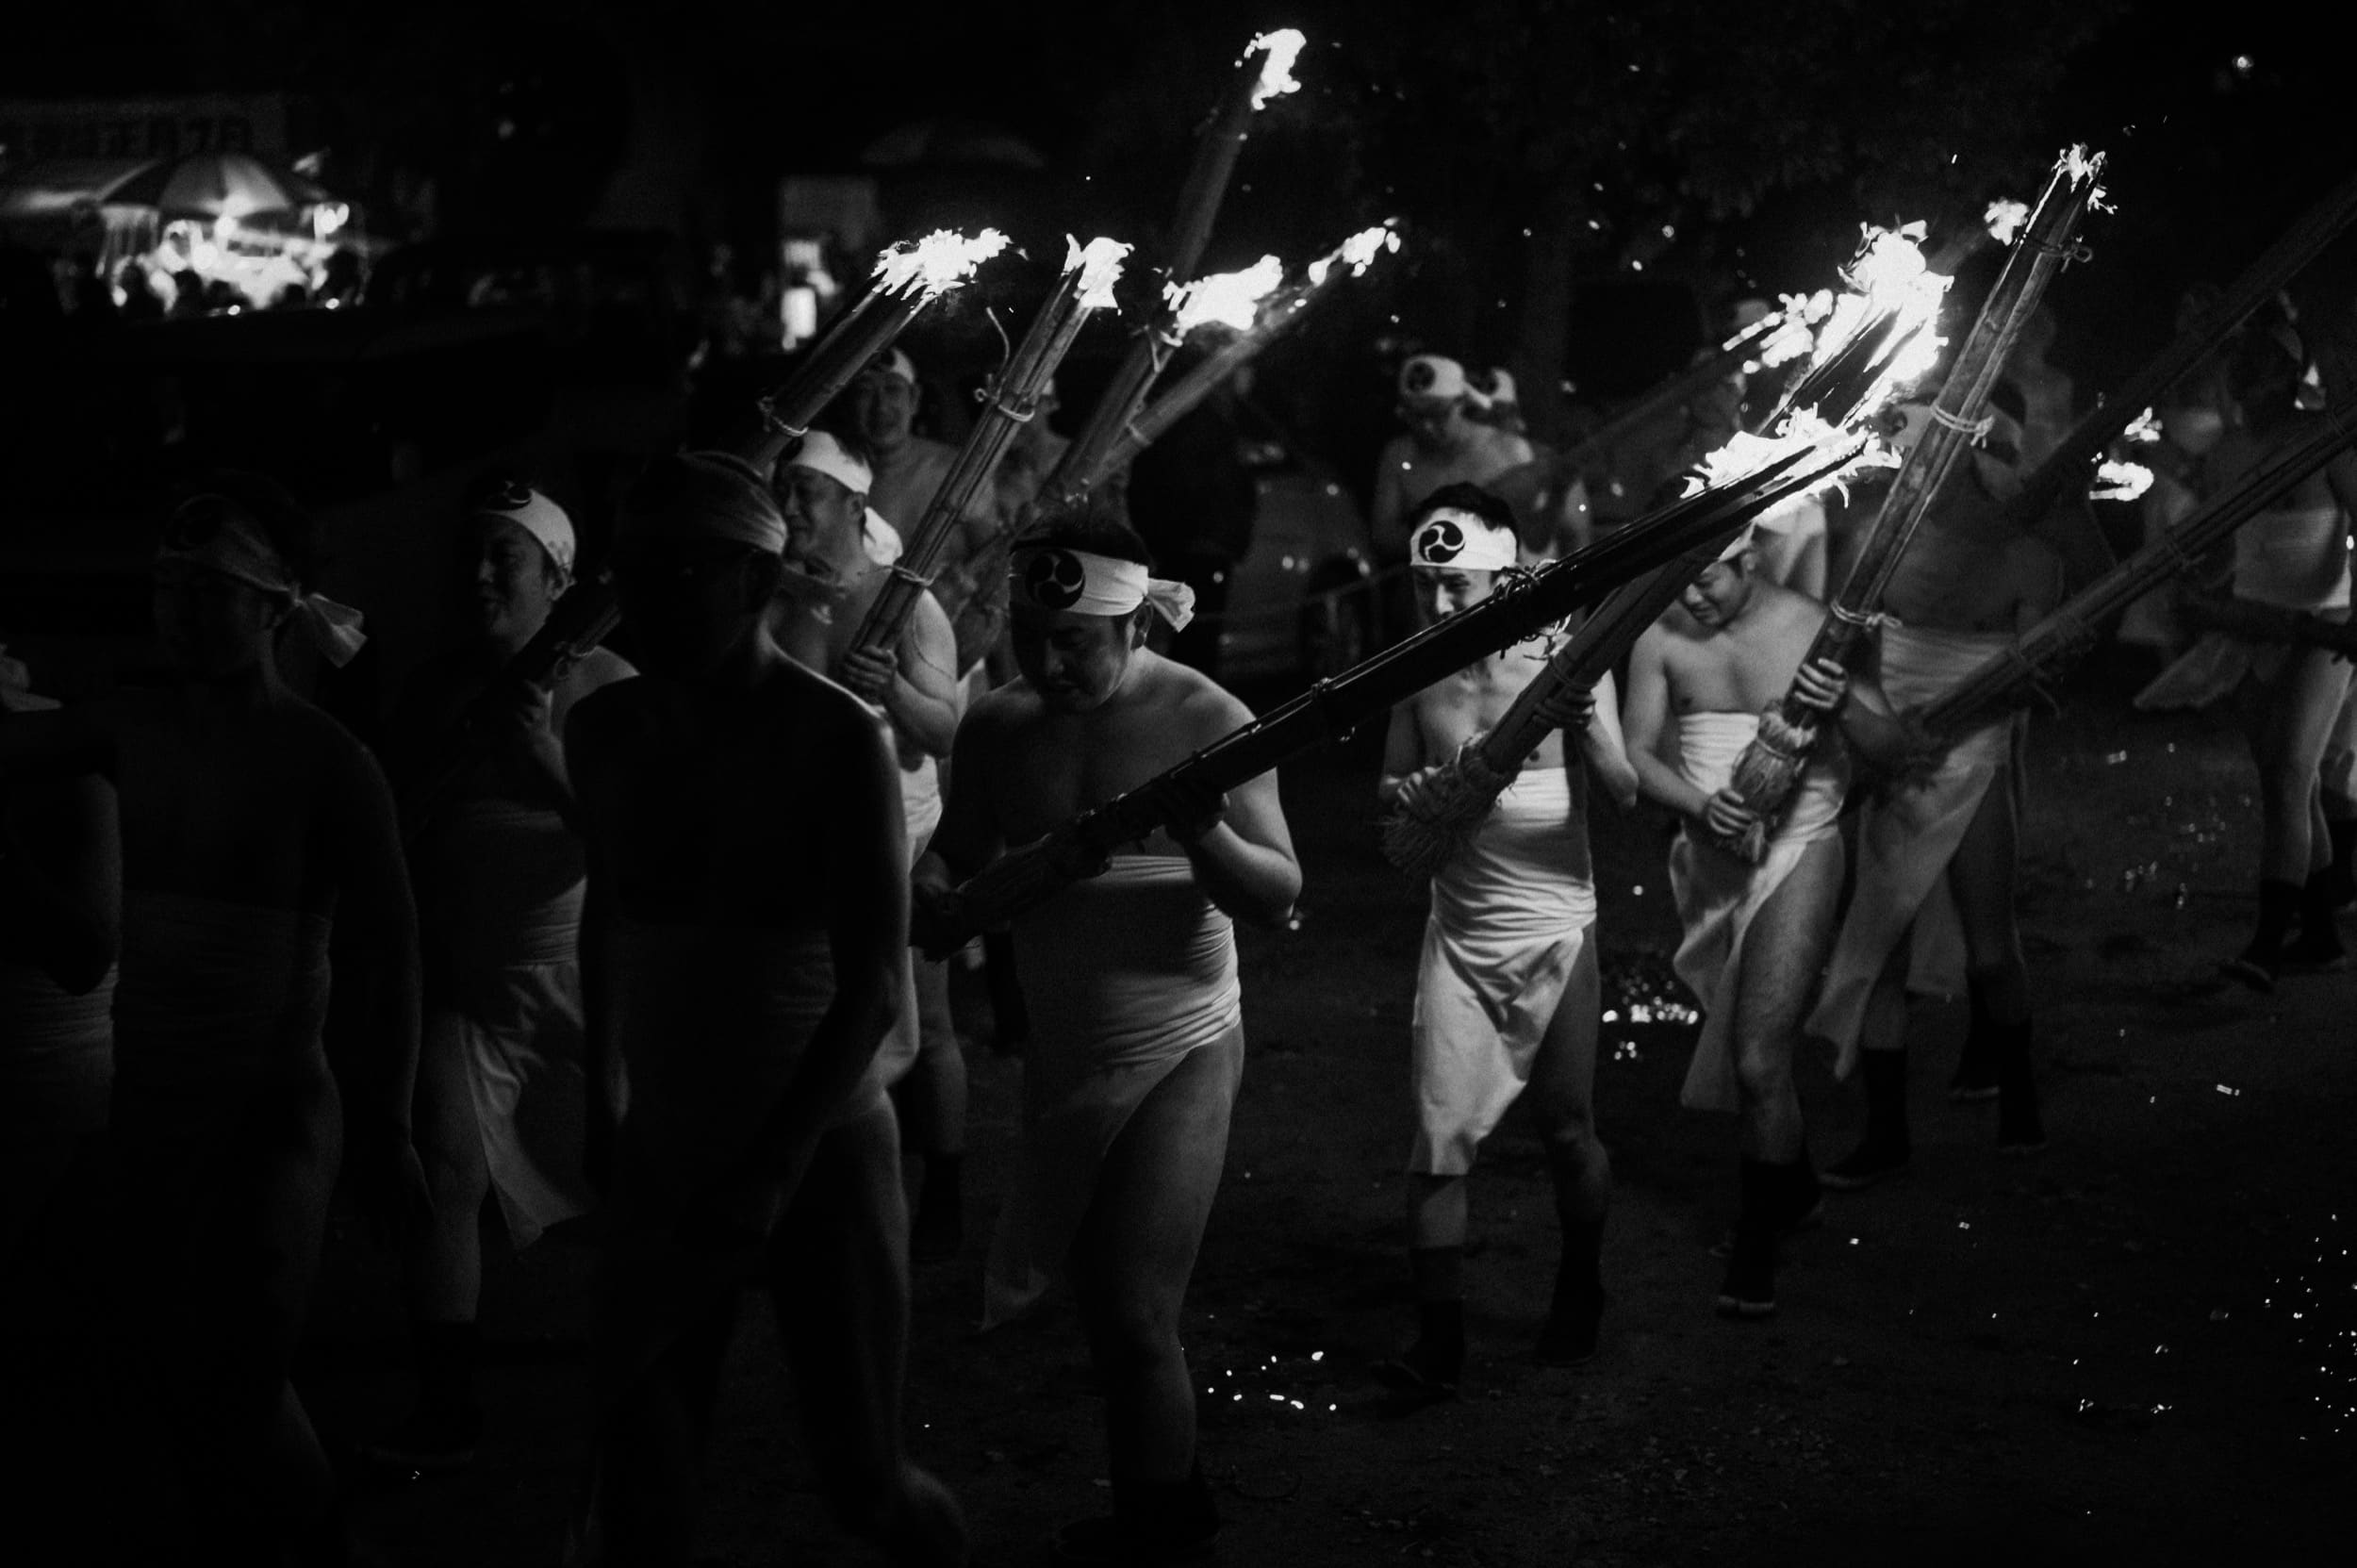 group roams with torches